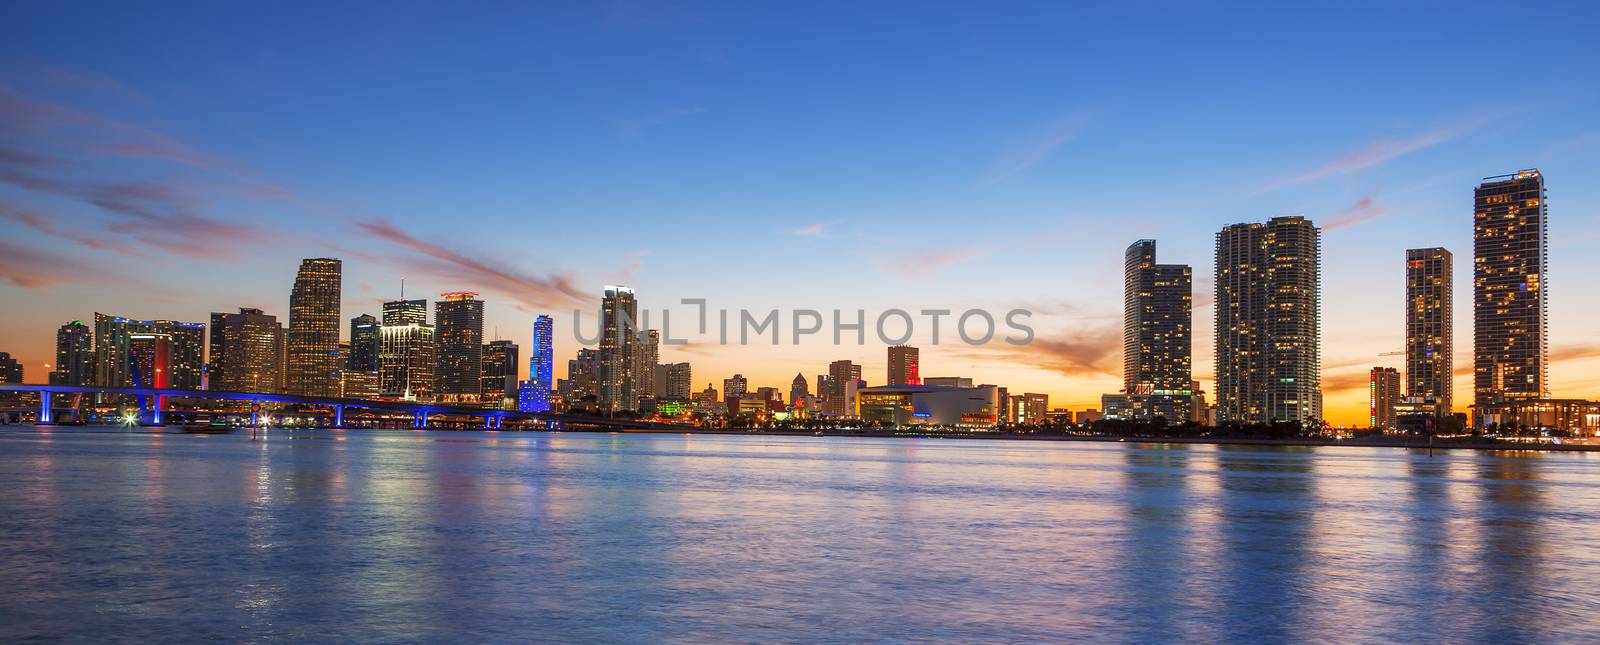 Panoramic view of Miami at sunset by vwalakte